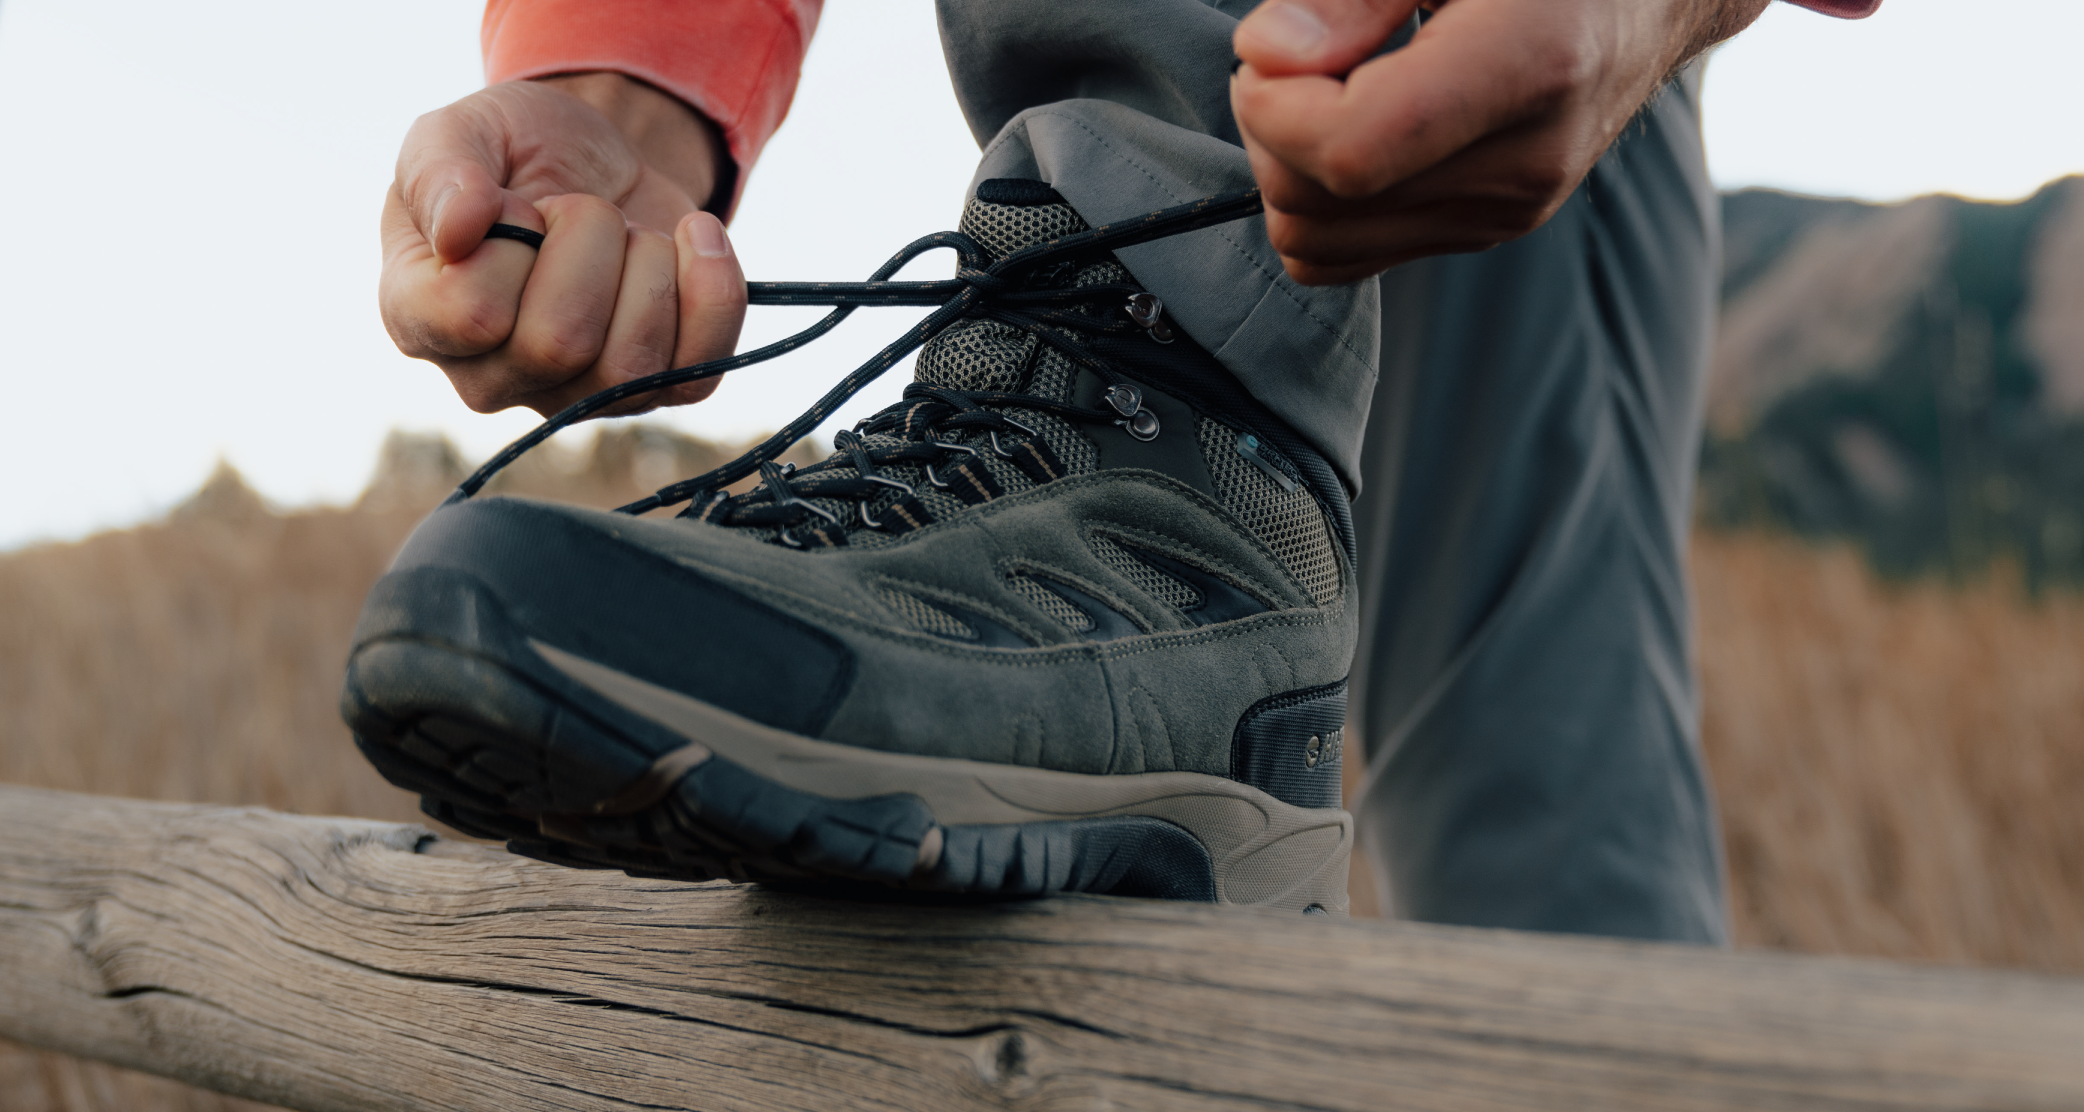 GPS Guidance In Your Shoes: The Hi-Tec Navigator with Lechel Technology